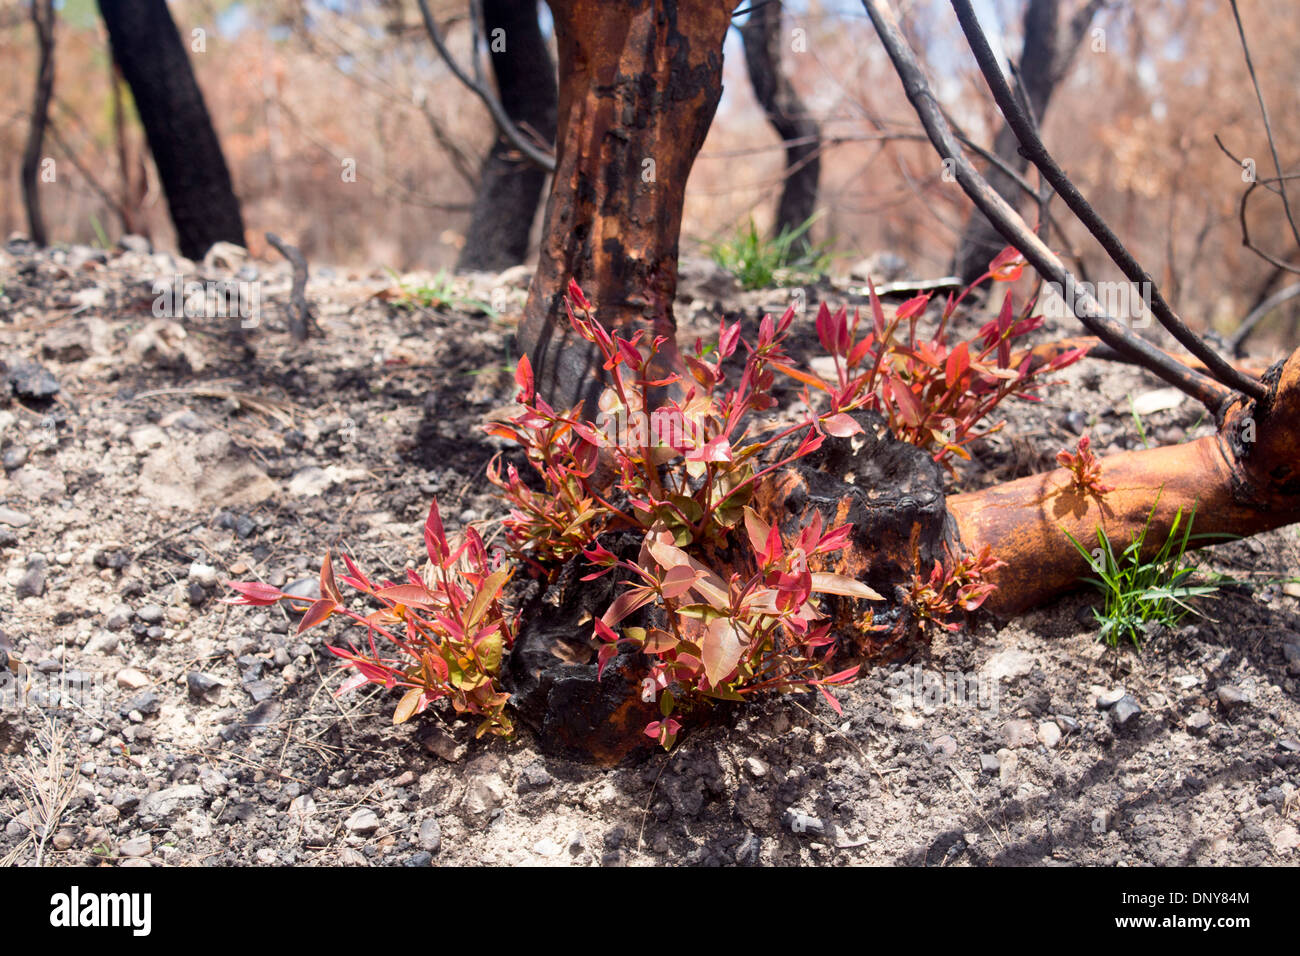 Regrowth plant regeneration after bushfire New leaves growing out of burned tree stump New South Wales NSW Australia Stock Photo